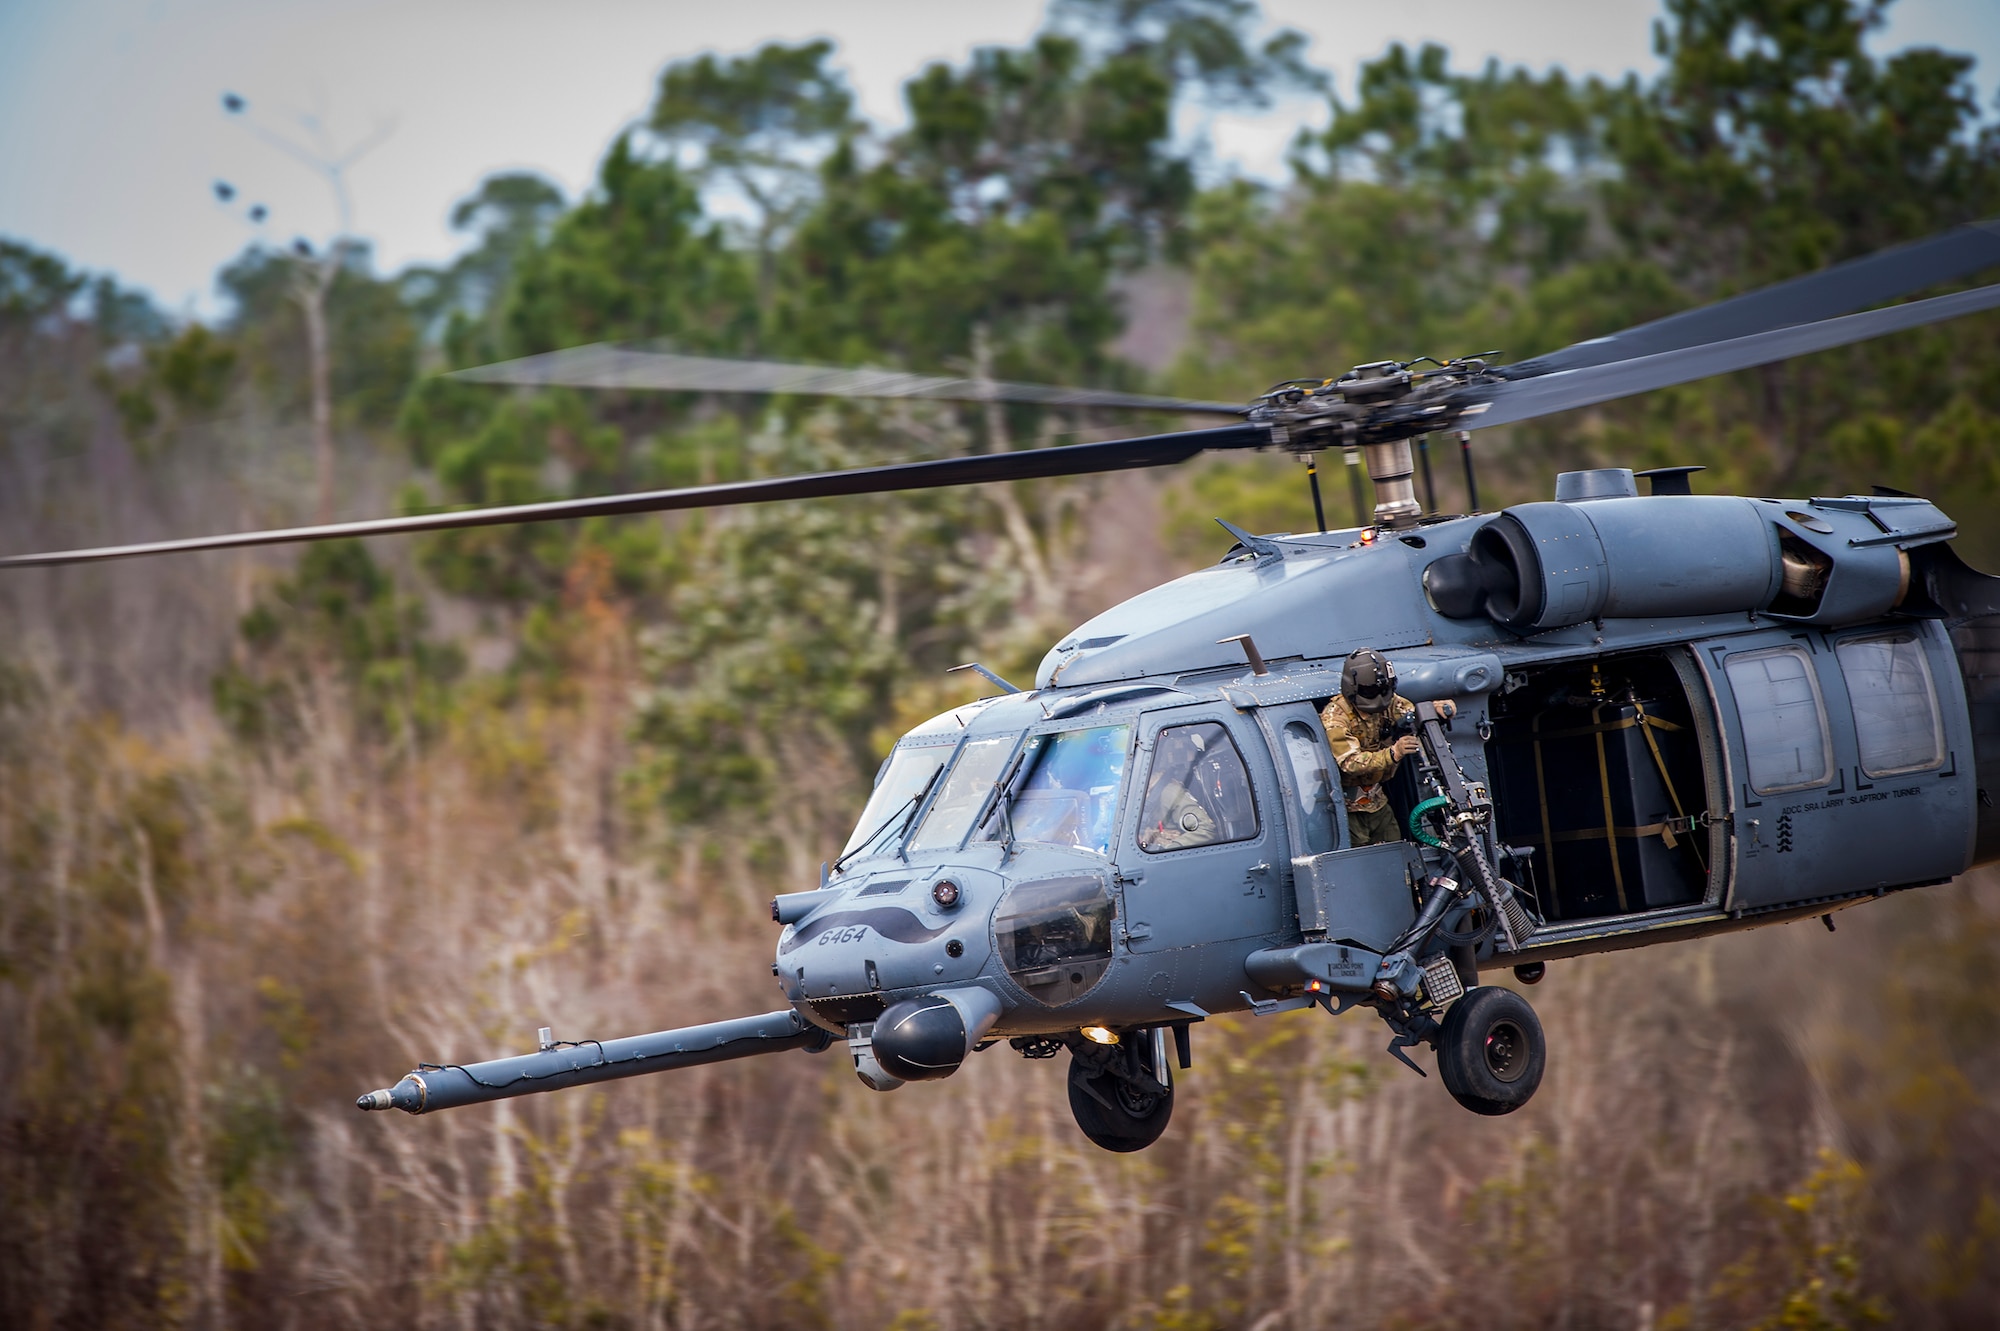 Airmen from the 41st Rescue Squadron take off in an HH-60G Pave Hawk helicopter during a training exercise, Jan. 26, 2016, at Moody Air Force Base, Ga. The HH-60G is armed with two individually-manned .50-caliber machine guns that Airmen fired at ground targets during the training. (U.S. Air Force photo by Airman 1st Class Lauren M. Johnson/Released)